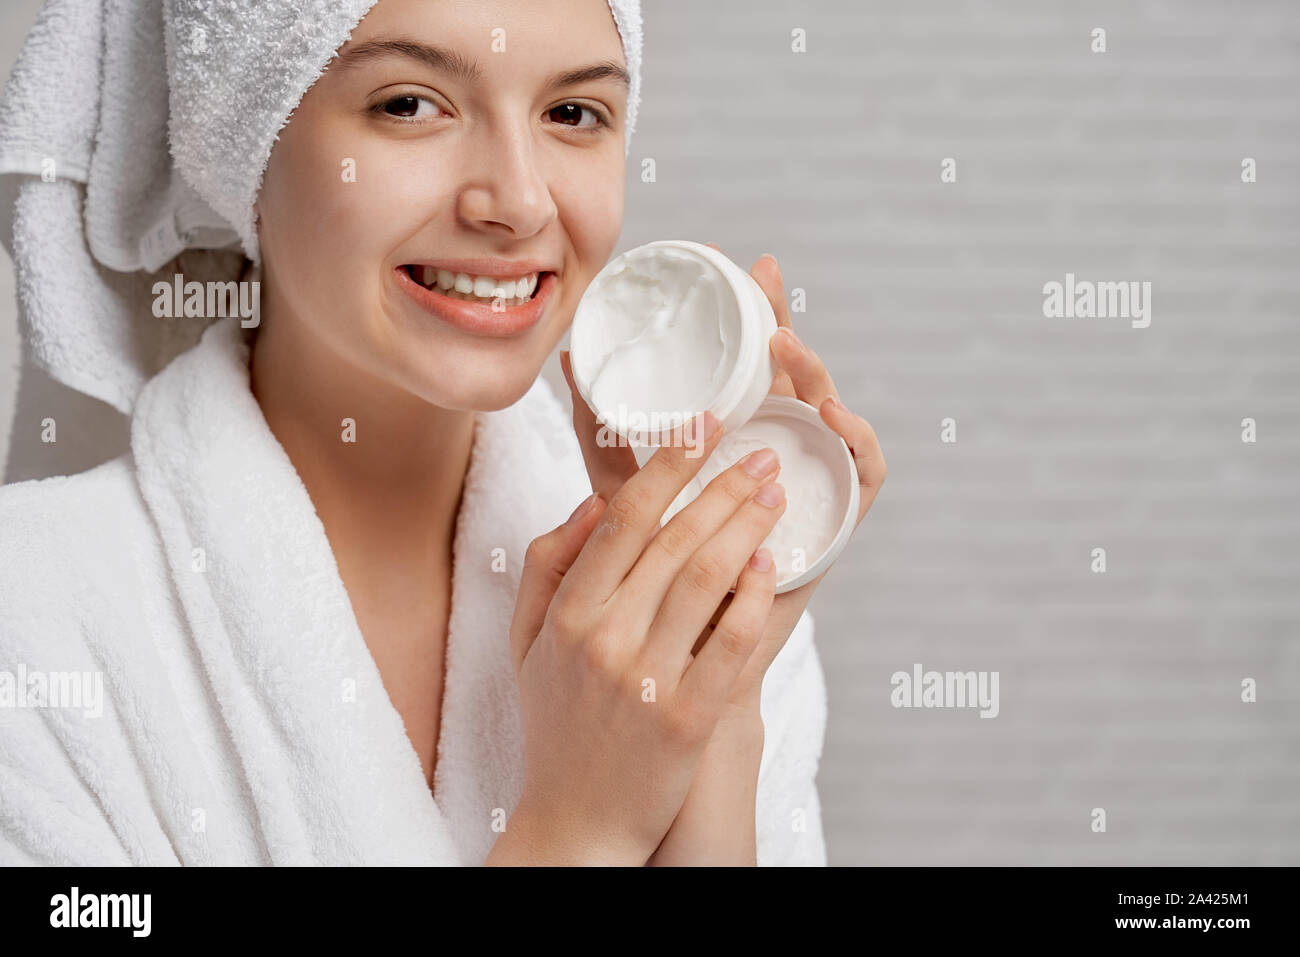 Pretty, young woman holding and showing white box with cosmetic cream. Beautiful model with perfect skin in white bathrobe and white towel on head smiling, looking at camera. Stock Photo